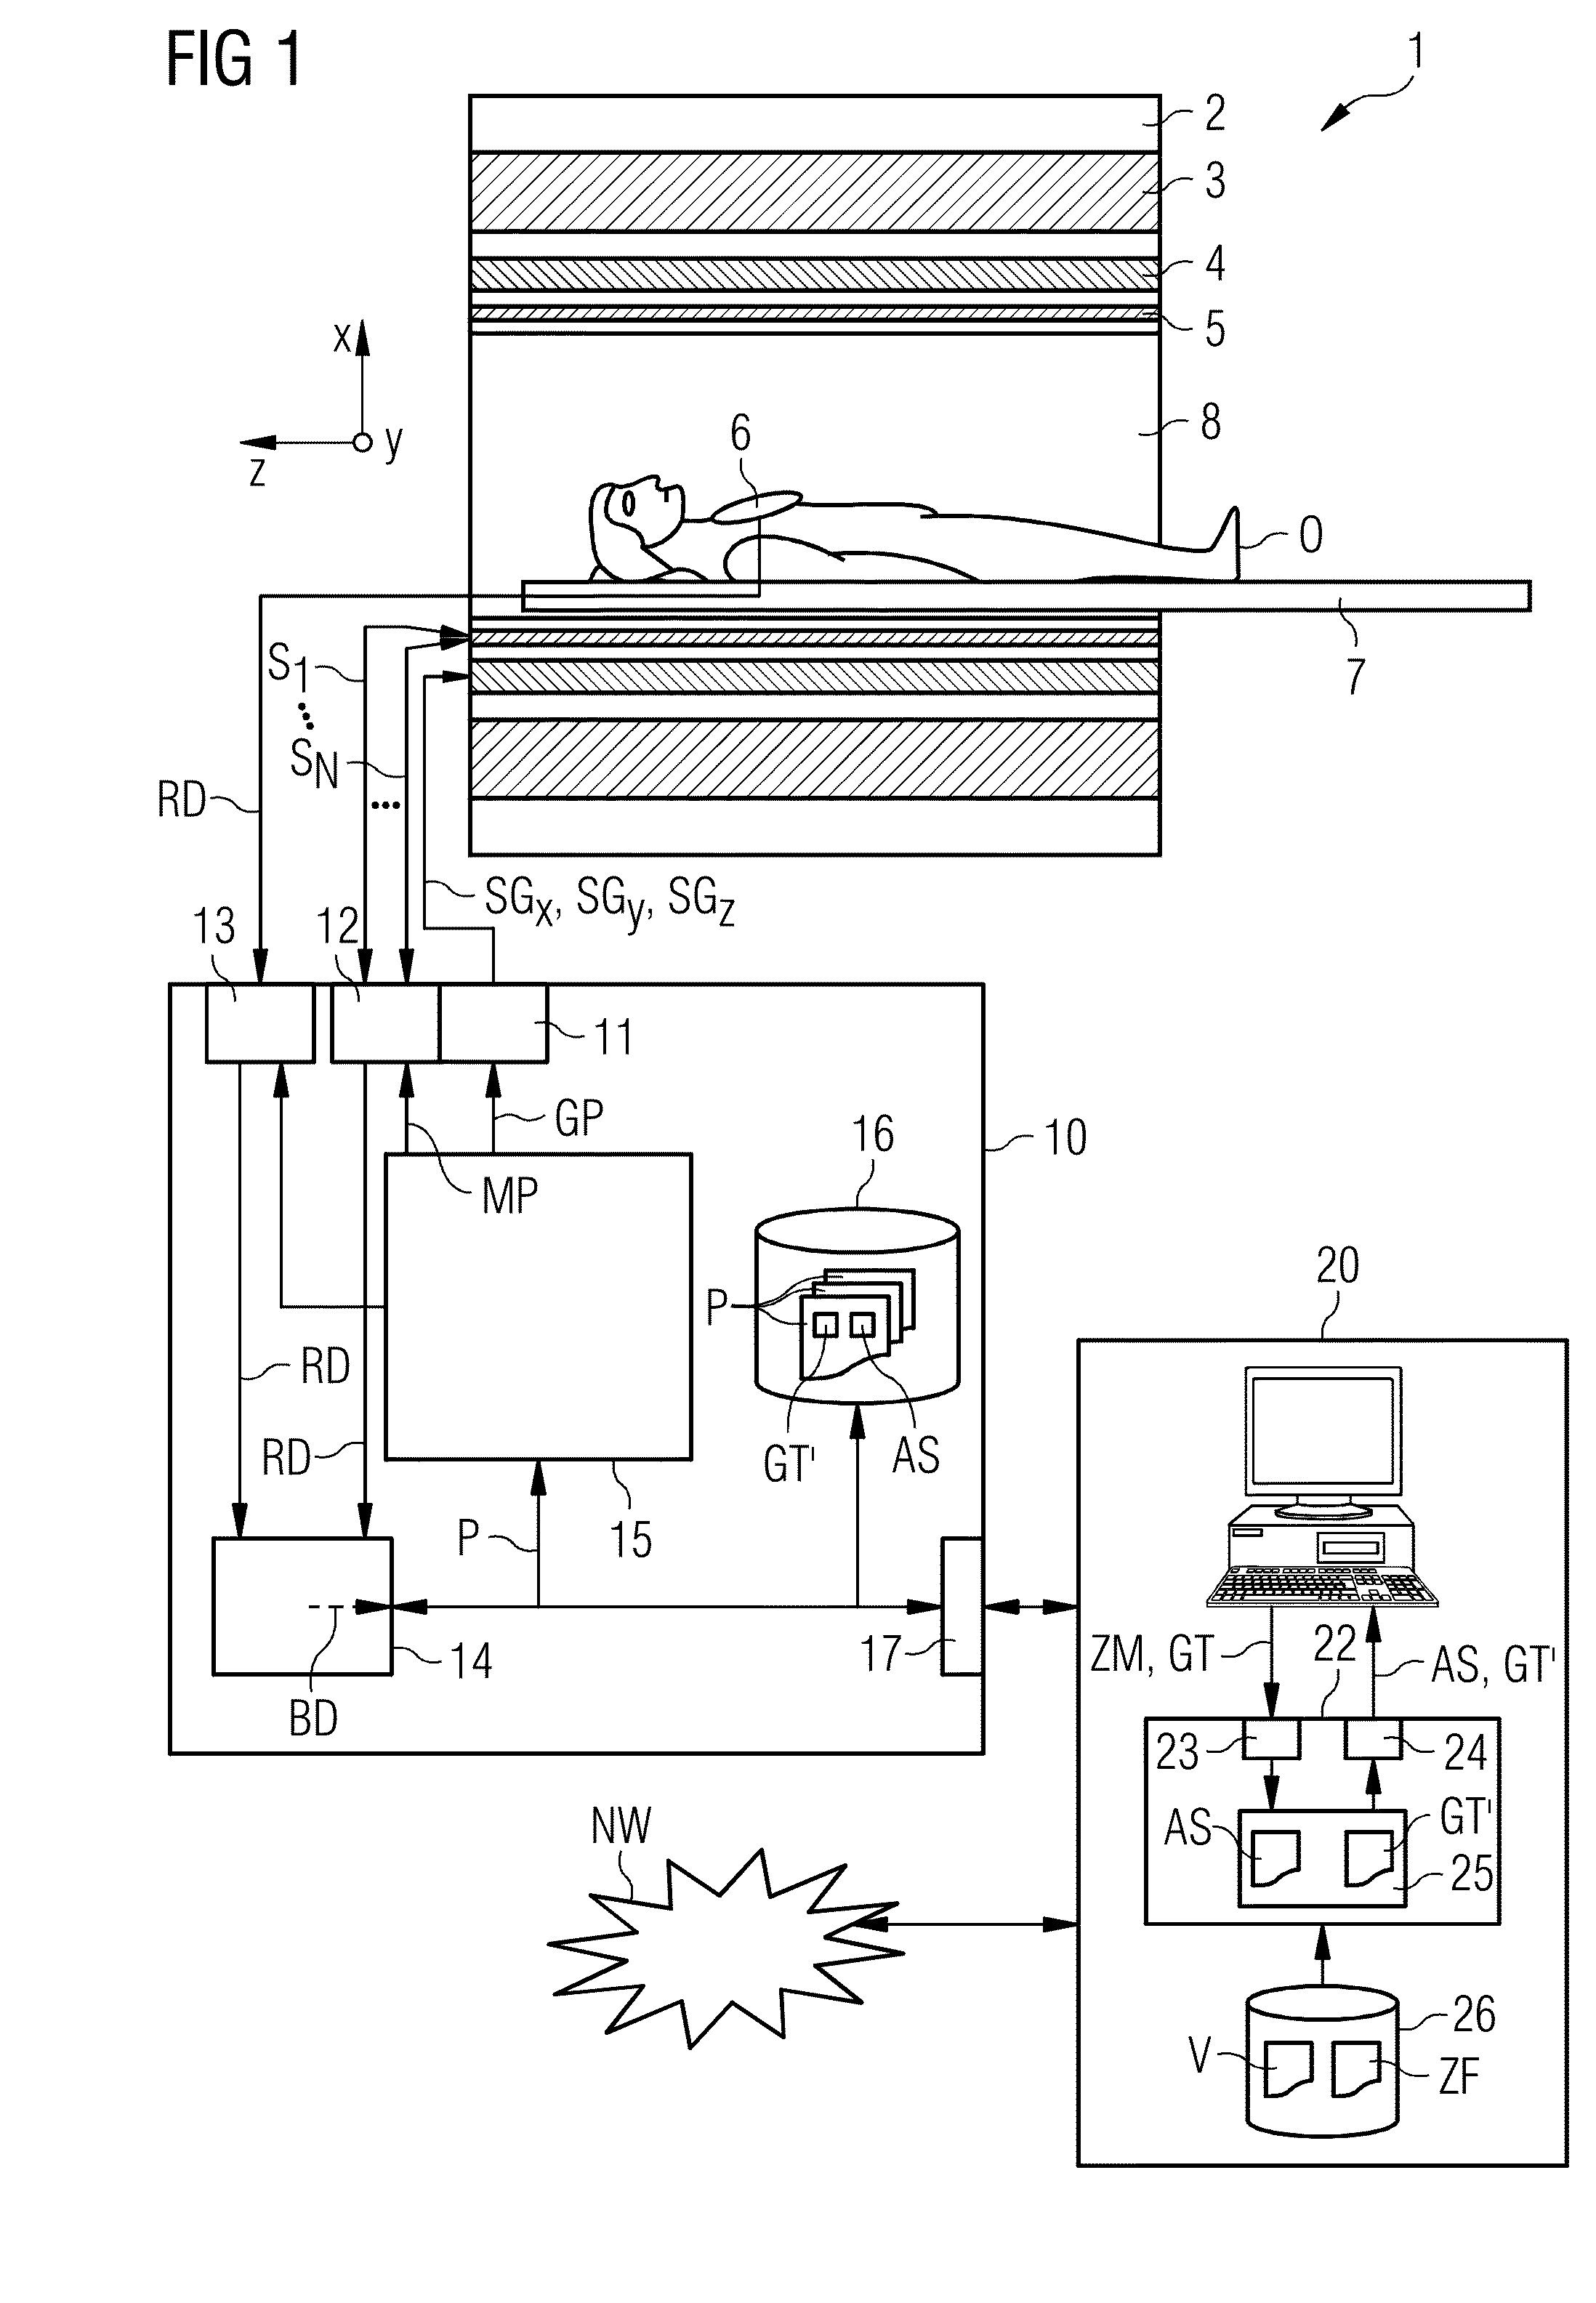 Determining a Magnetic Resonance System Control Sequence